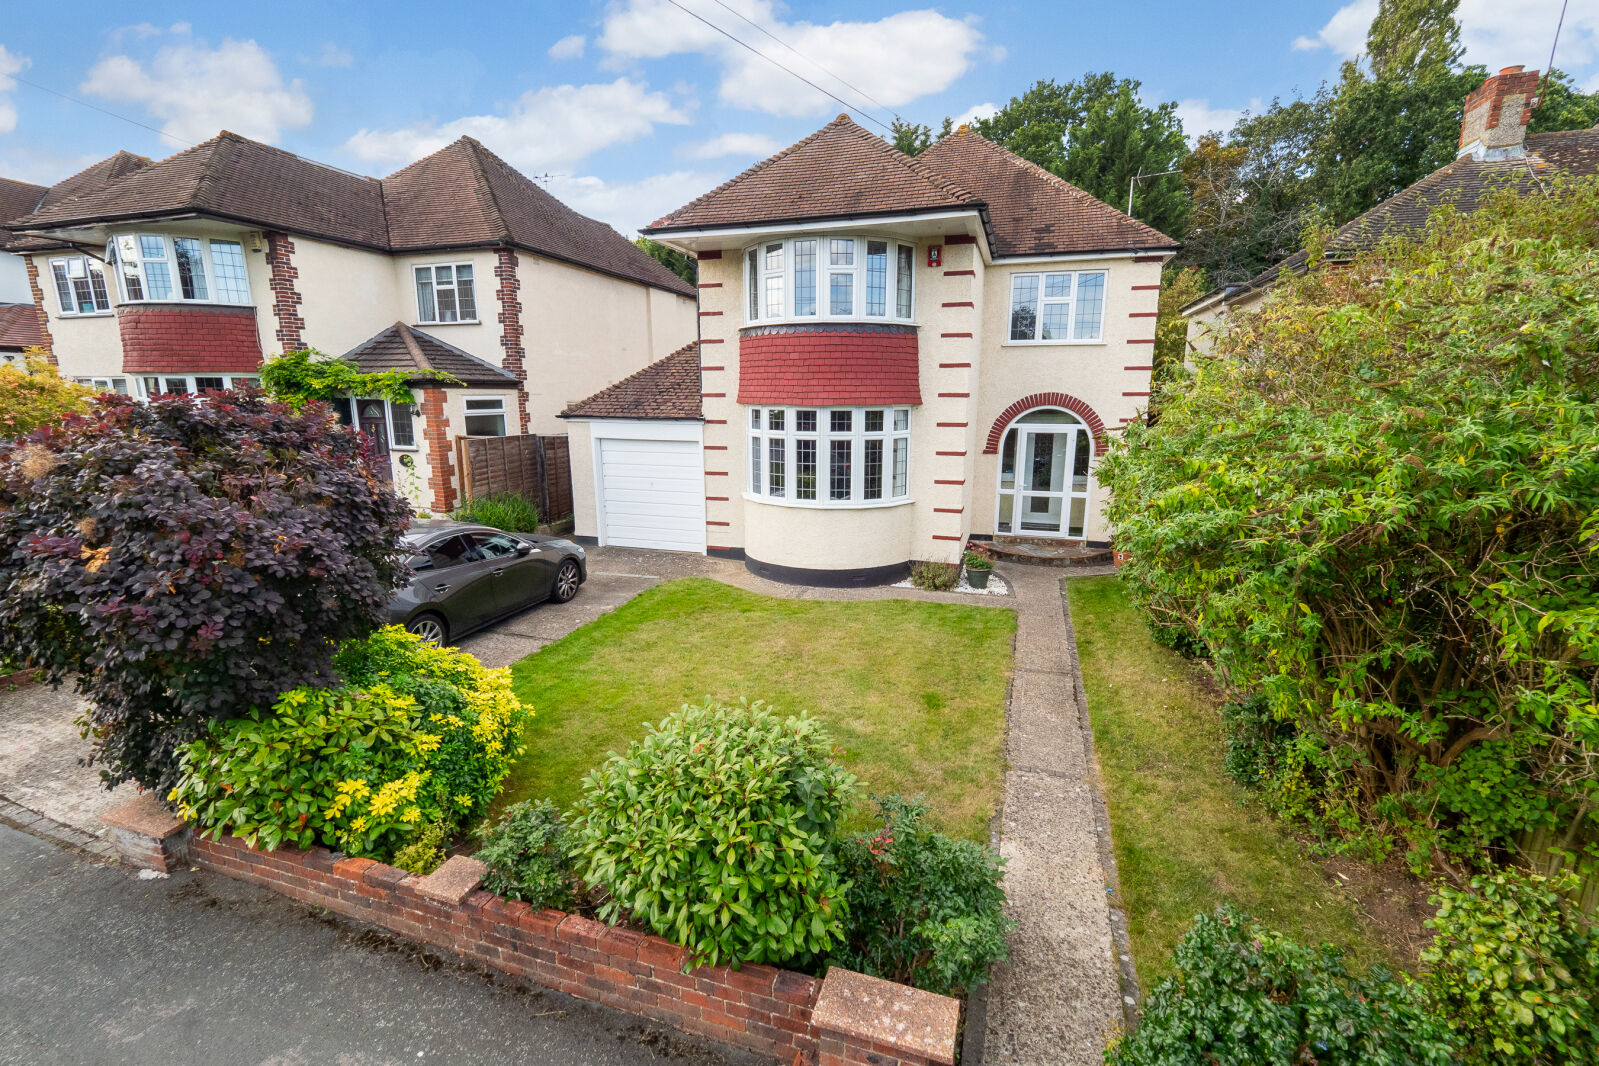 3 bedroom detached house for sale Holmwood Road, Cheam, SM2, main image